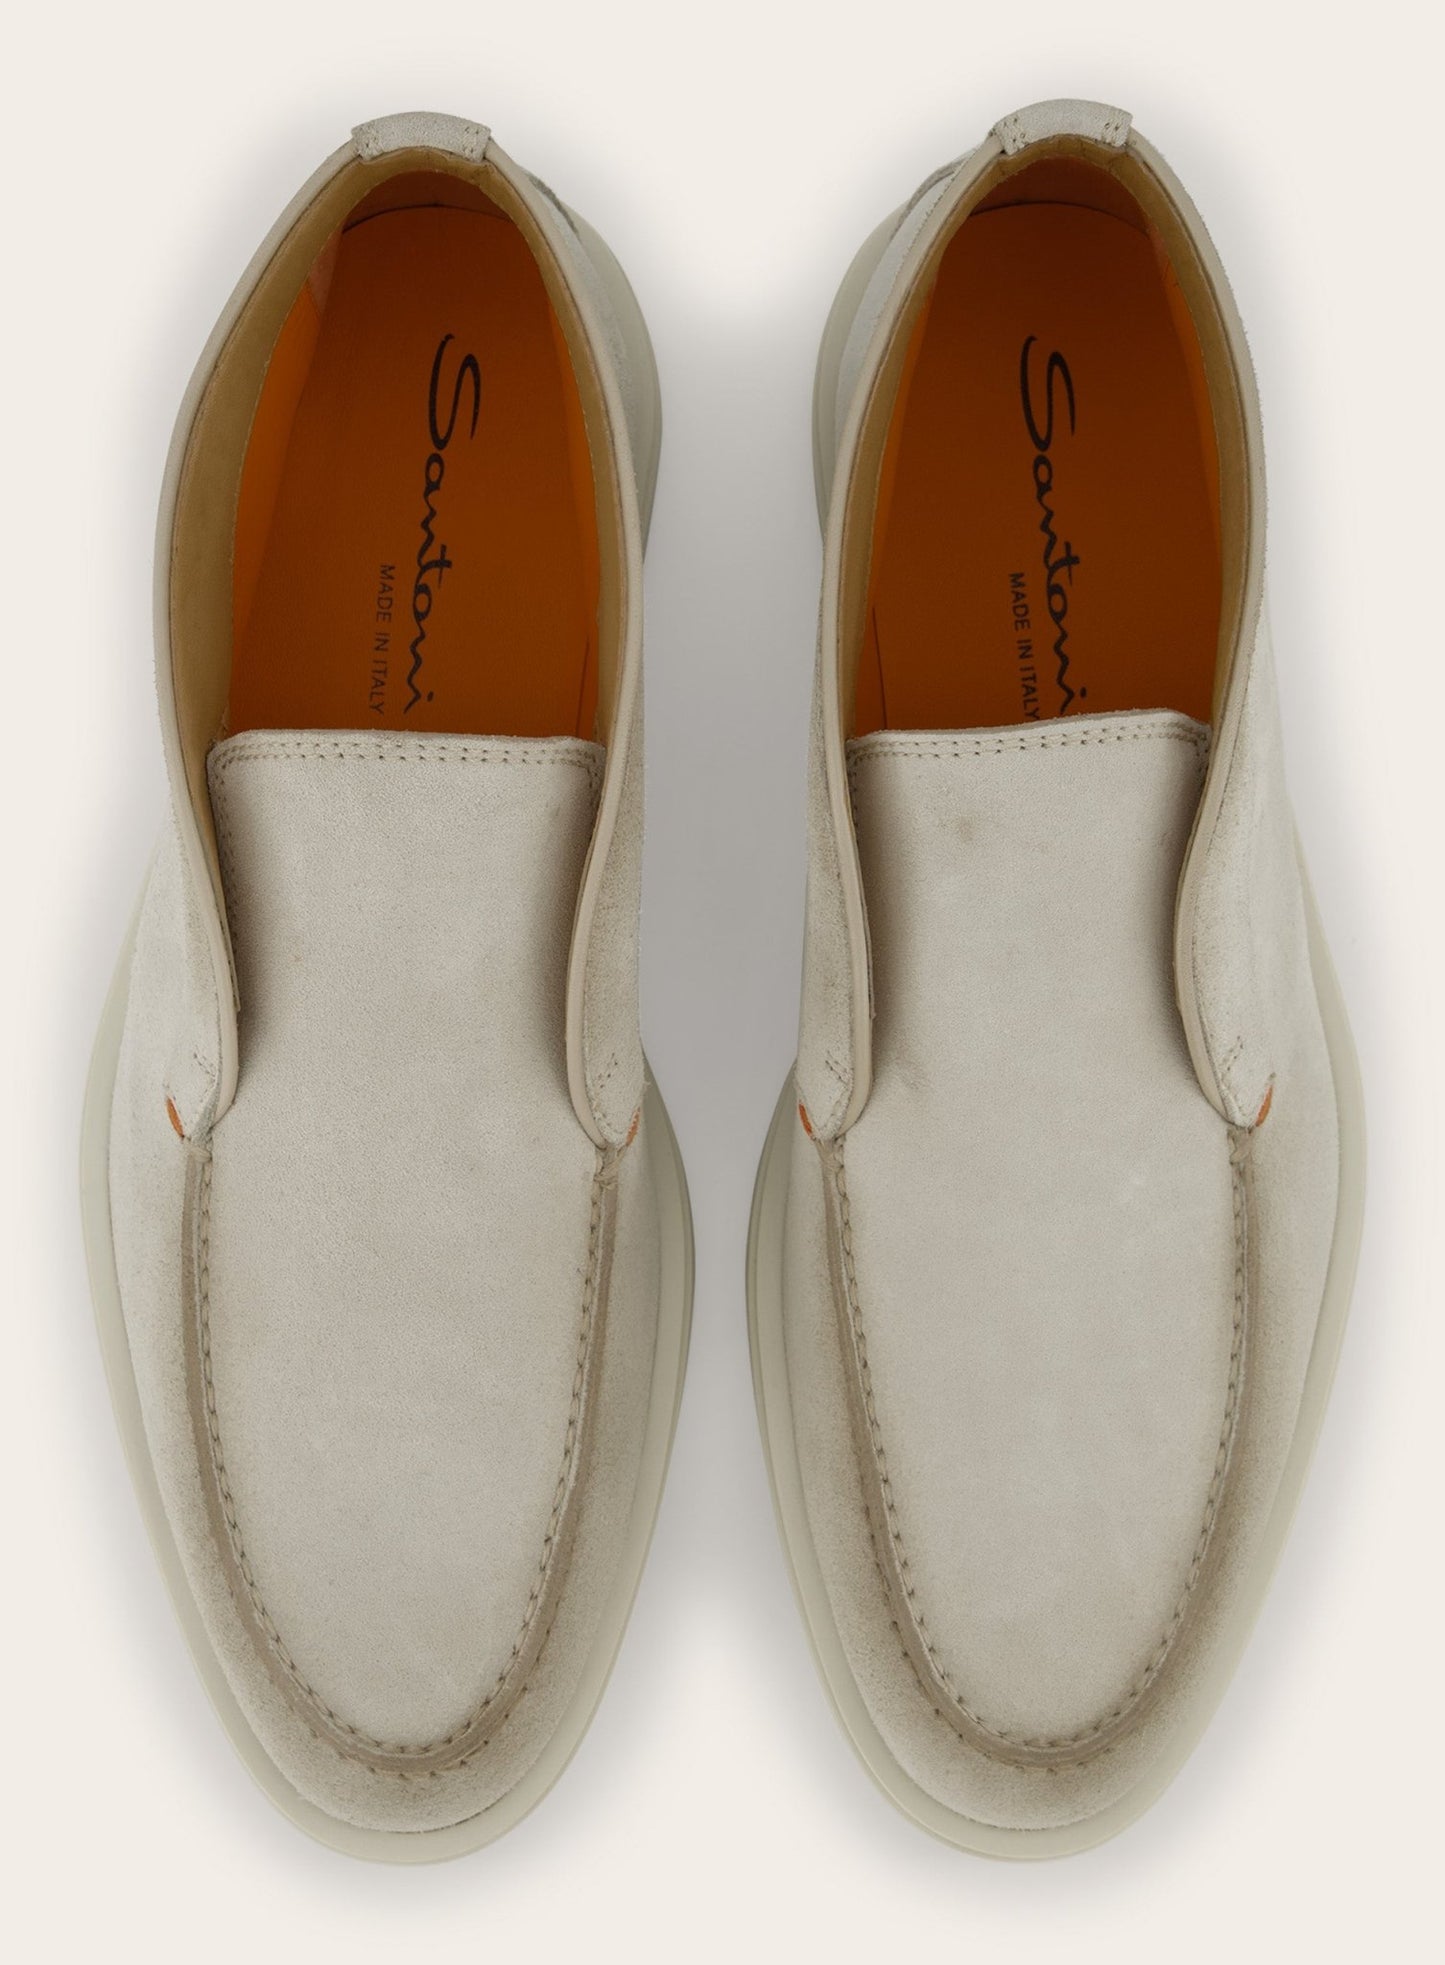 Detroit suede loafers